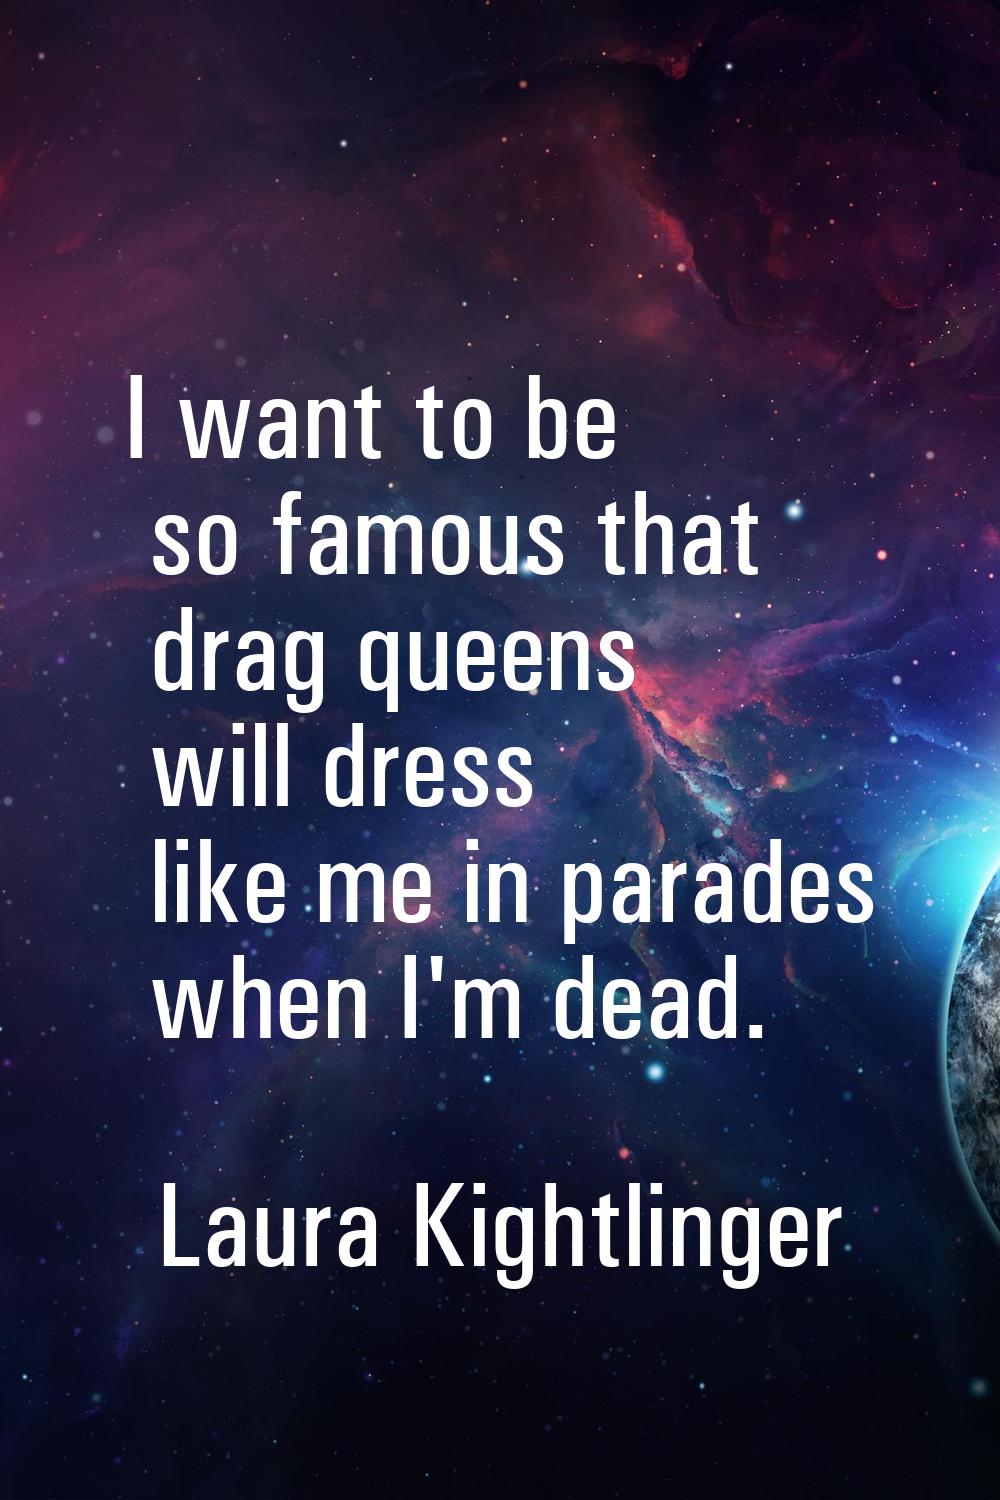 I want to be so famous that drag queens will dress like me in parades when I'm dead.